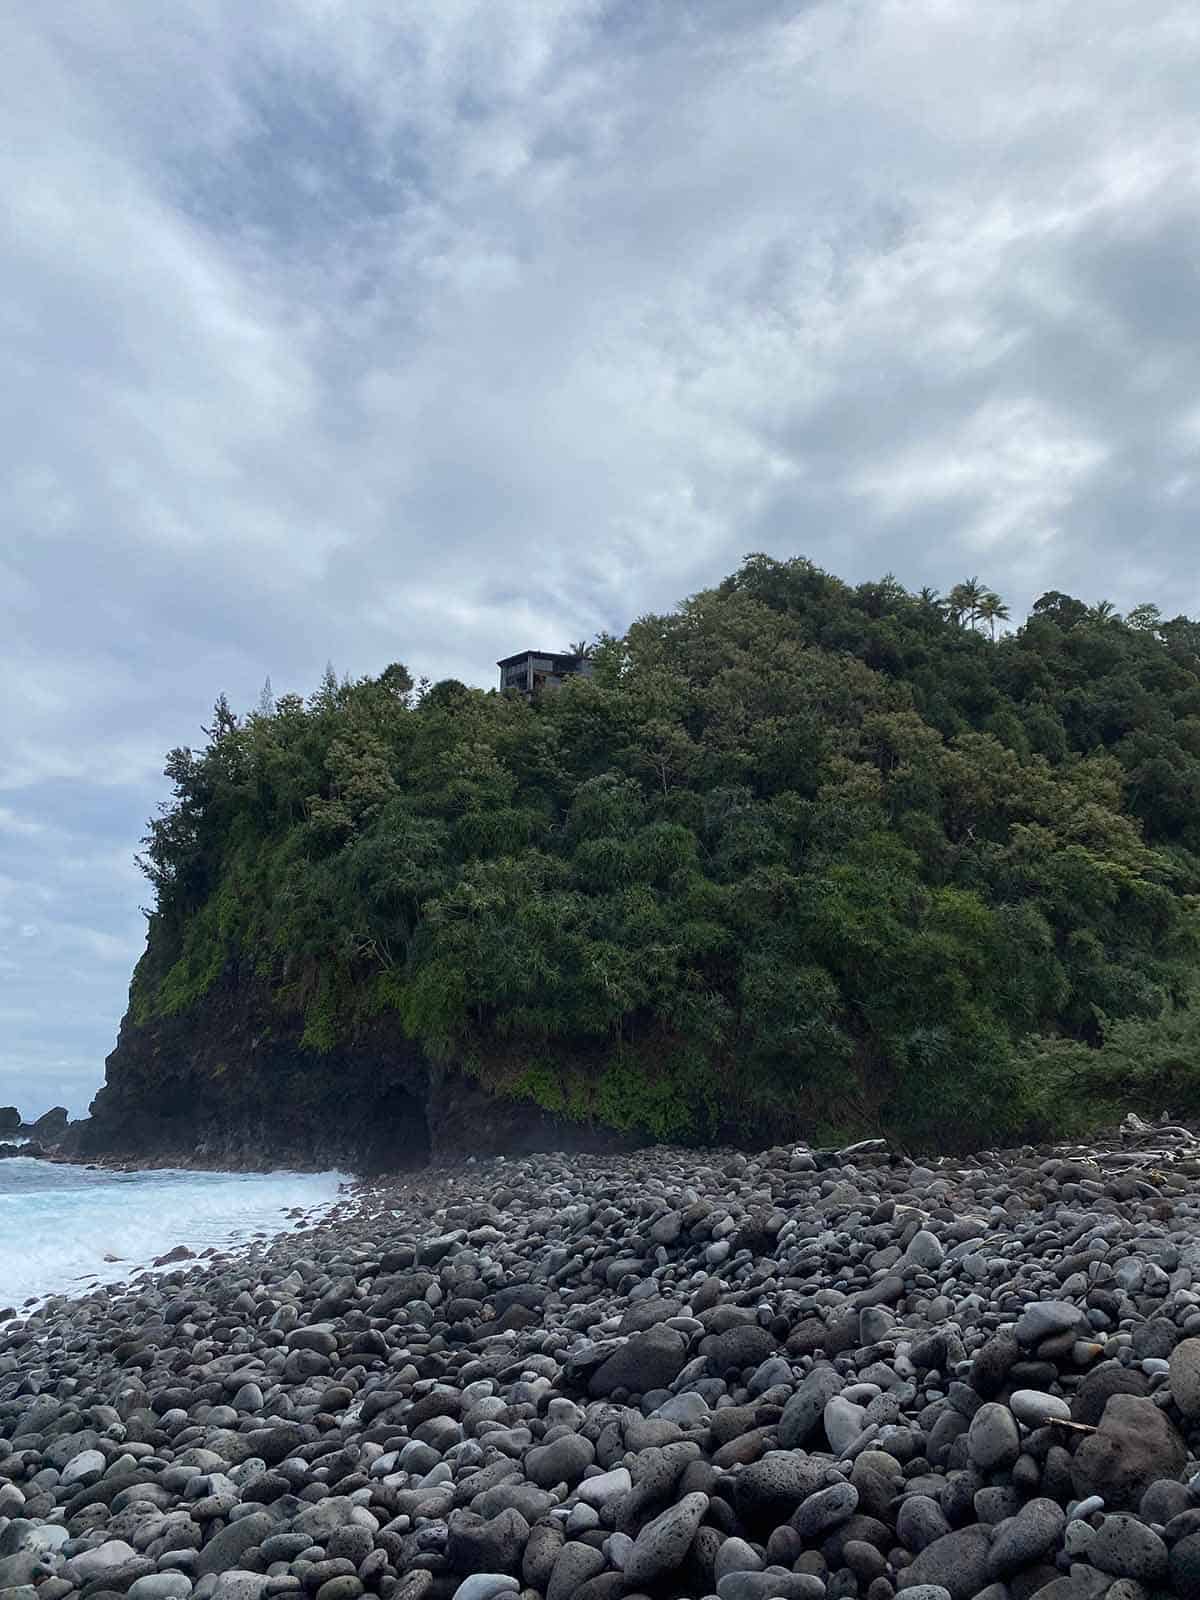 View from the beach of a cliff with the airbnb on top.